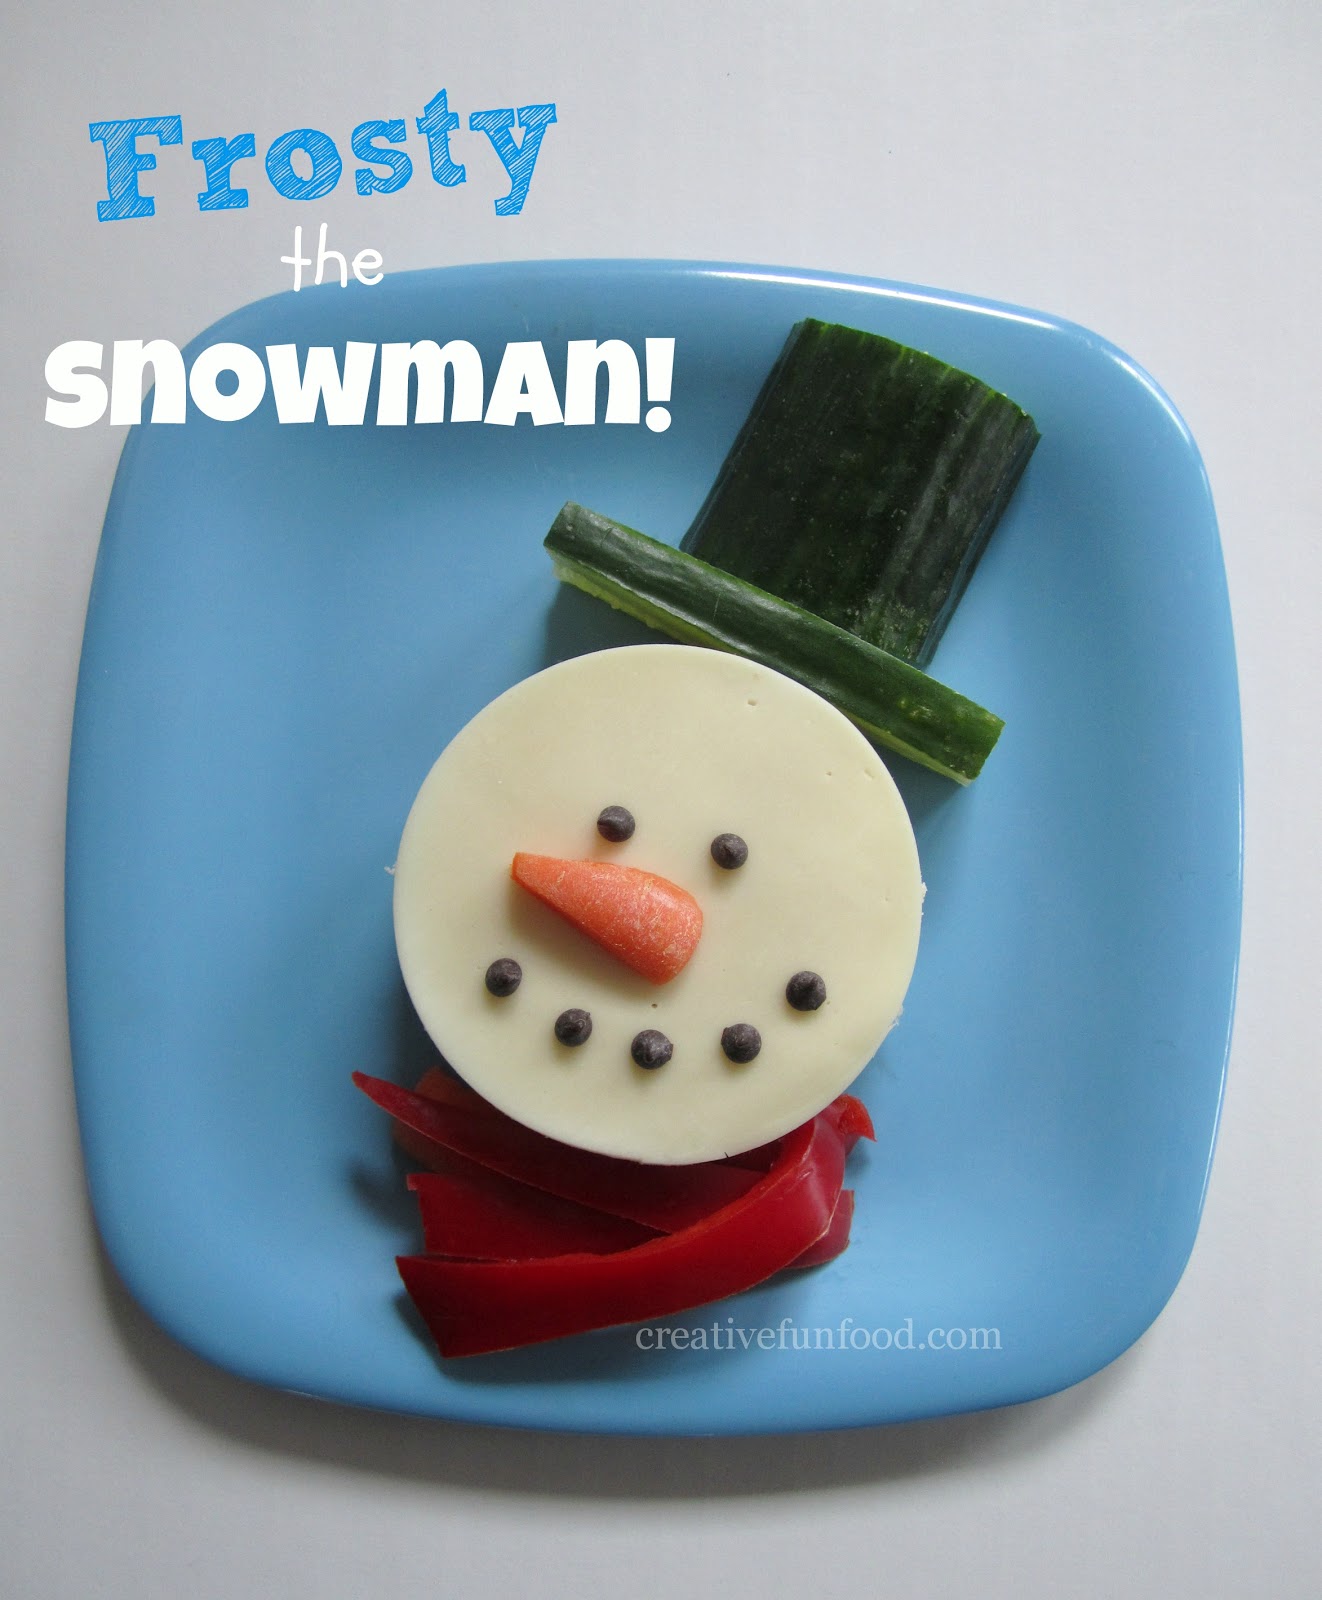 Creative Food: Frosty the Snowman!